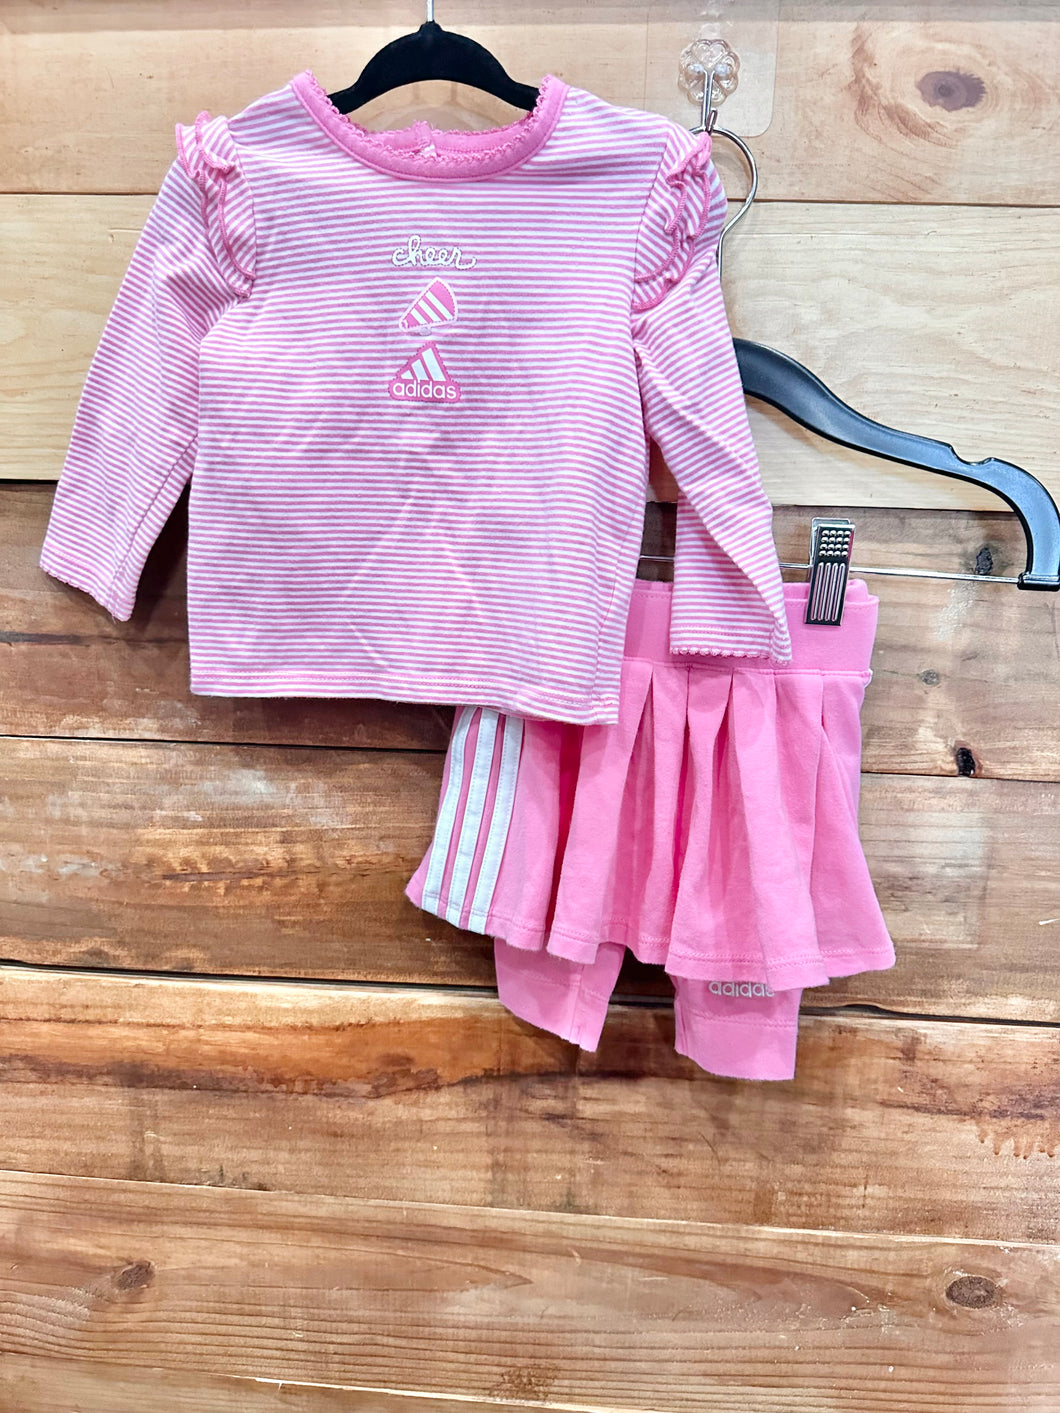 Adidas Pink 3pc Outfit Size 6m